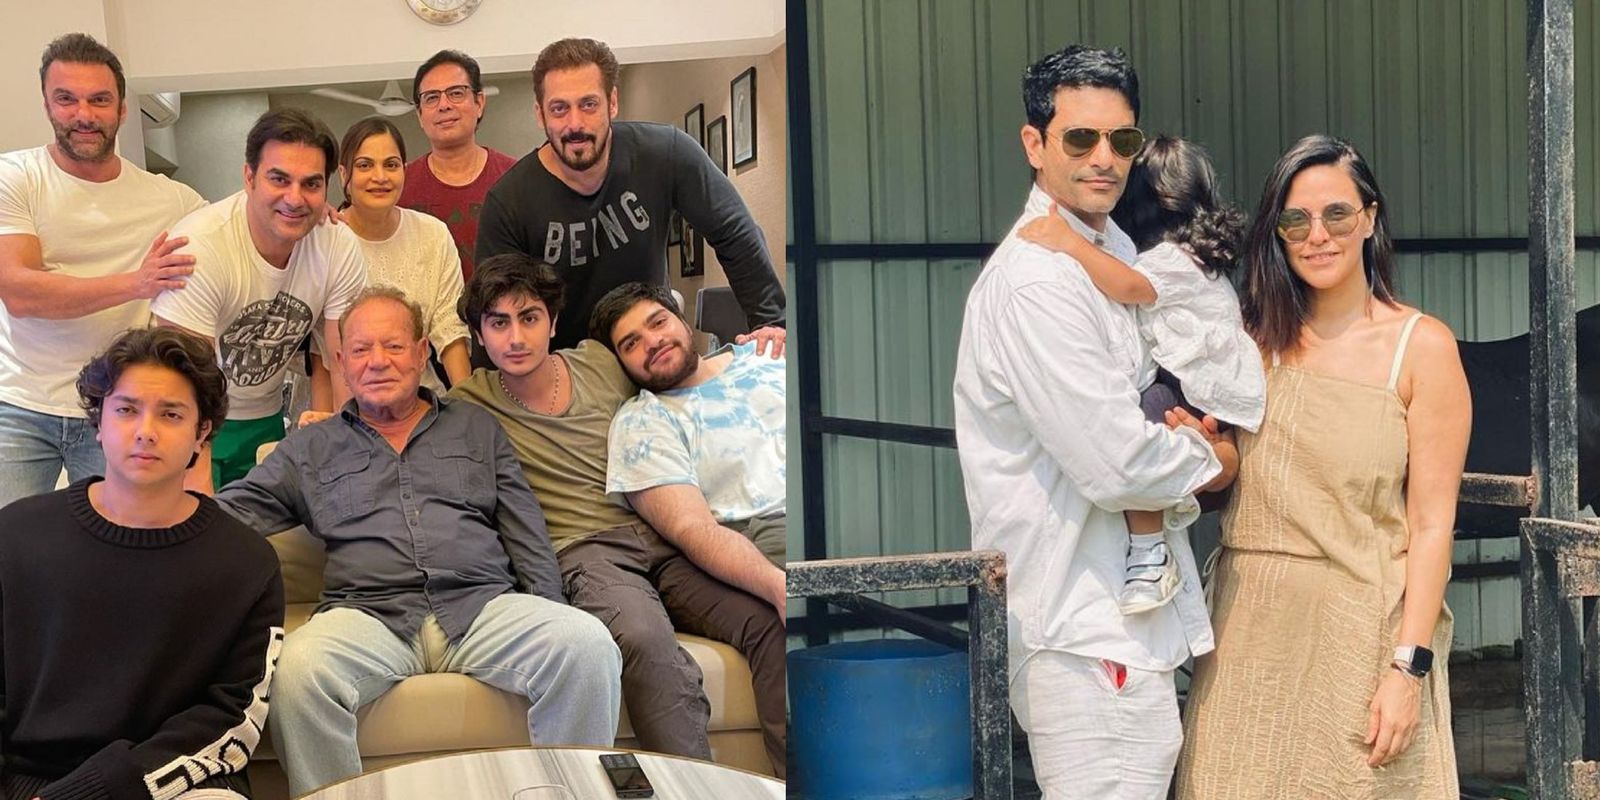 Salman Khan celebrates Father’s Day with family; Angad Bedi thanks Neha for capturing his happy moments with daughter Mehr